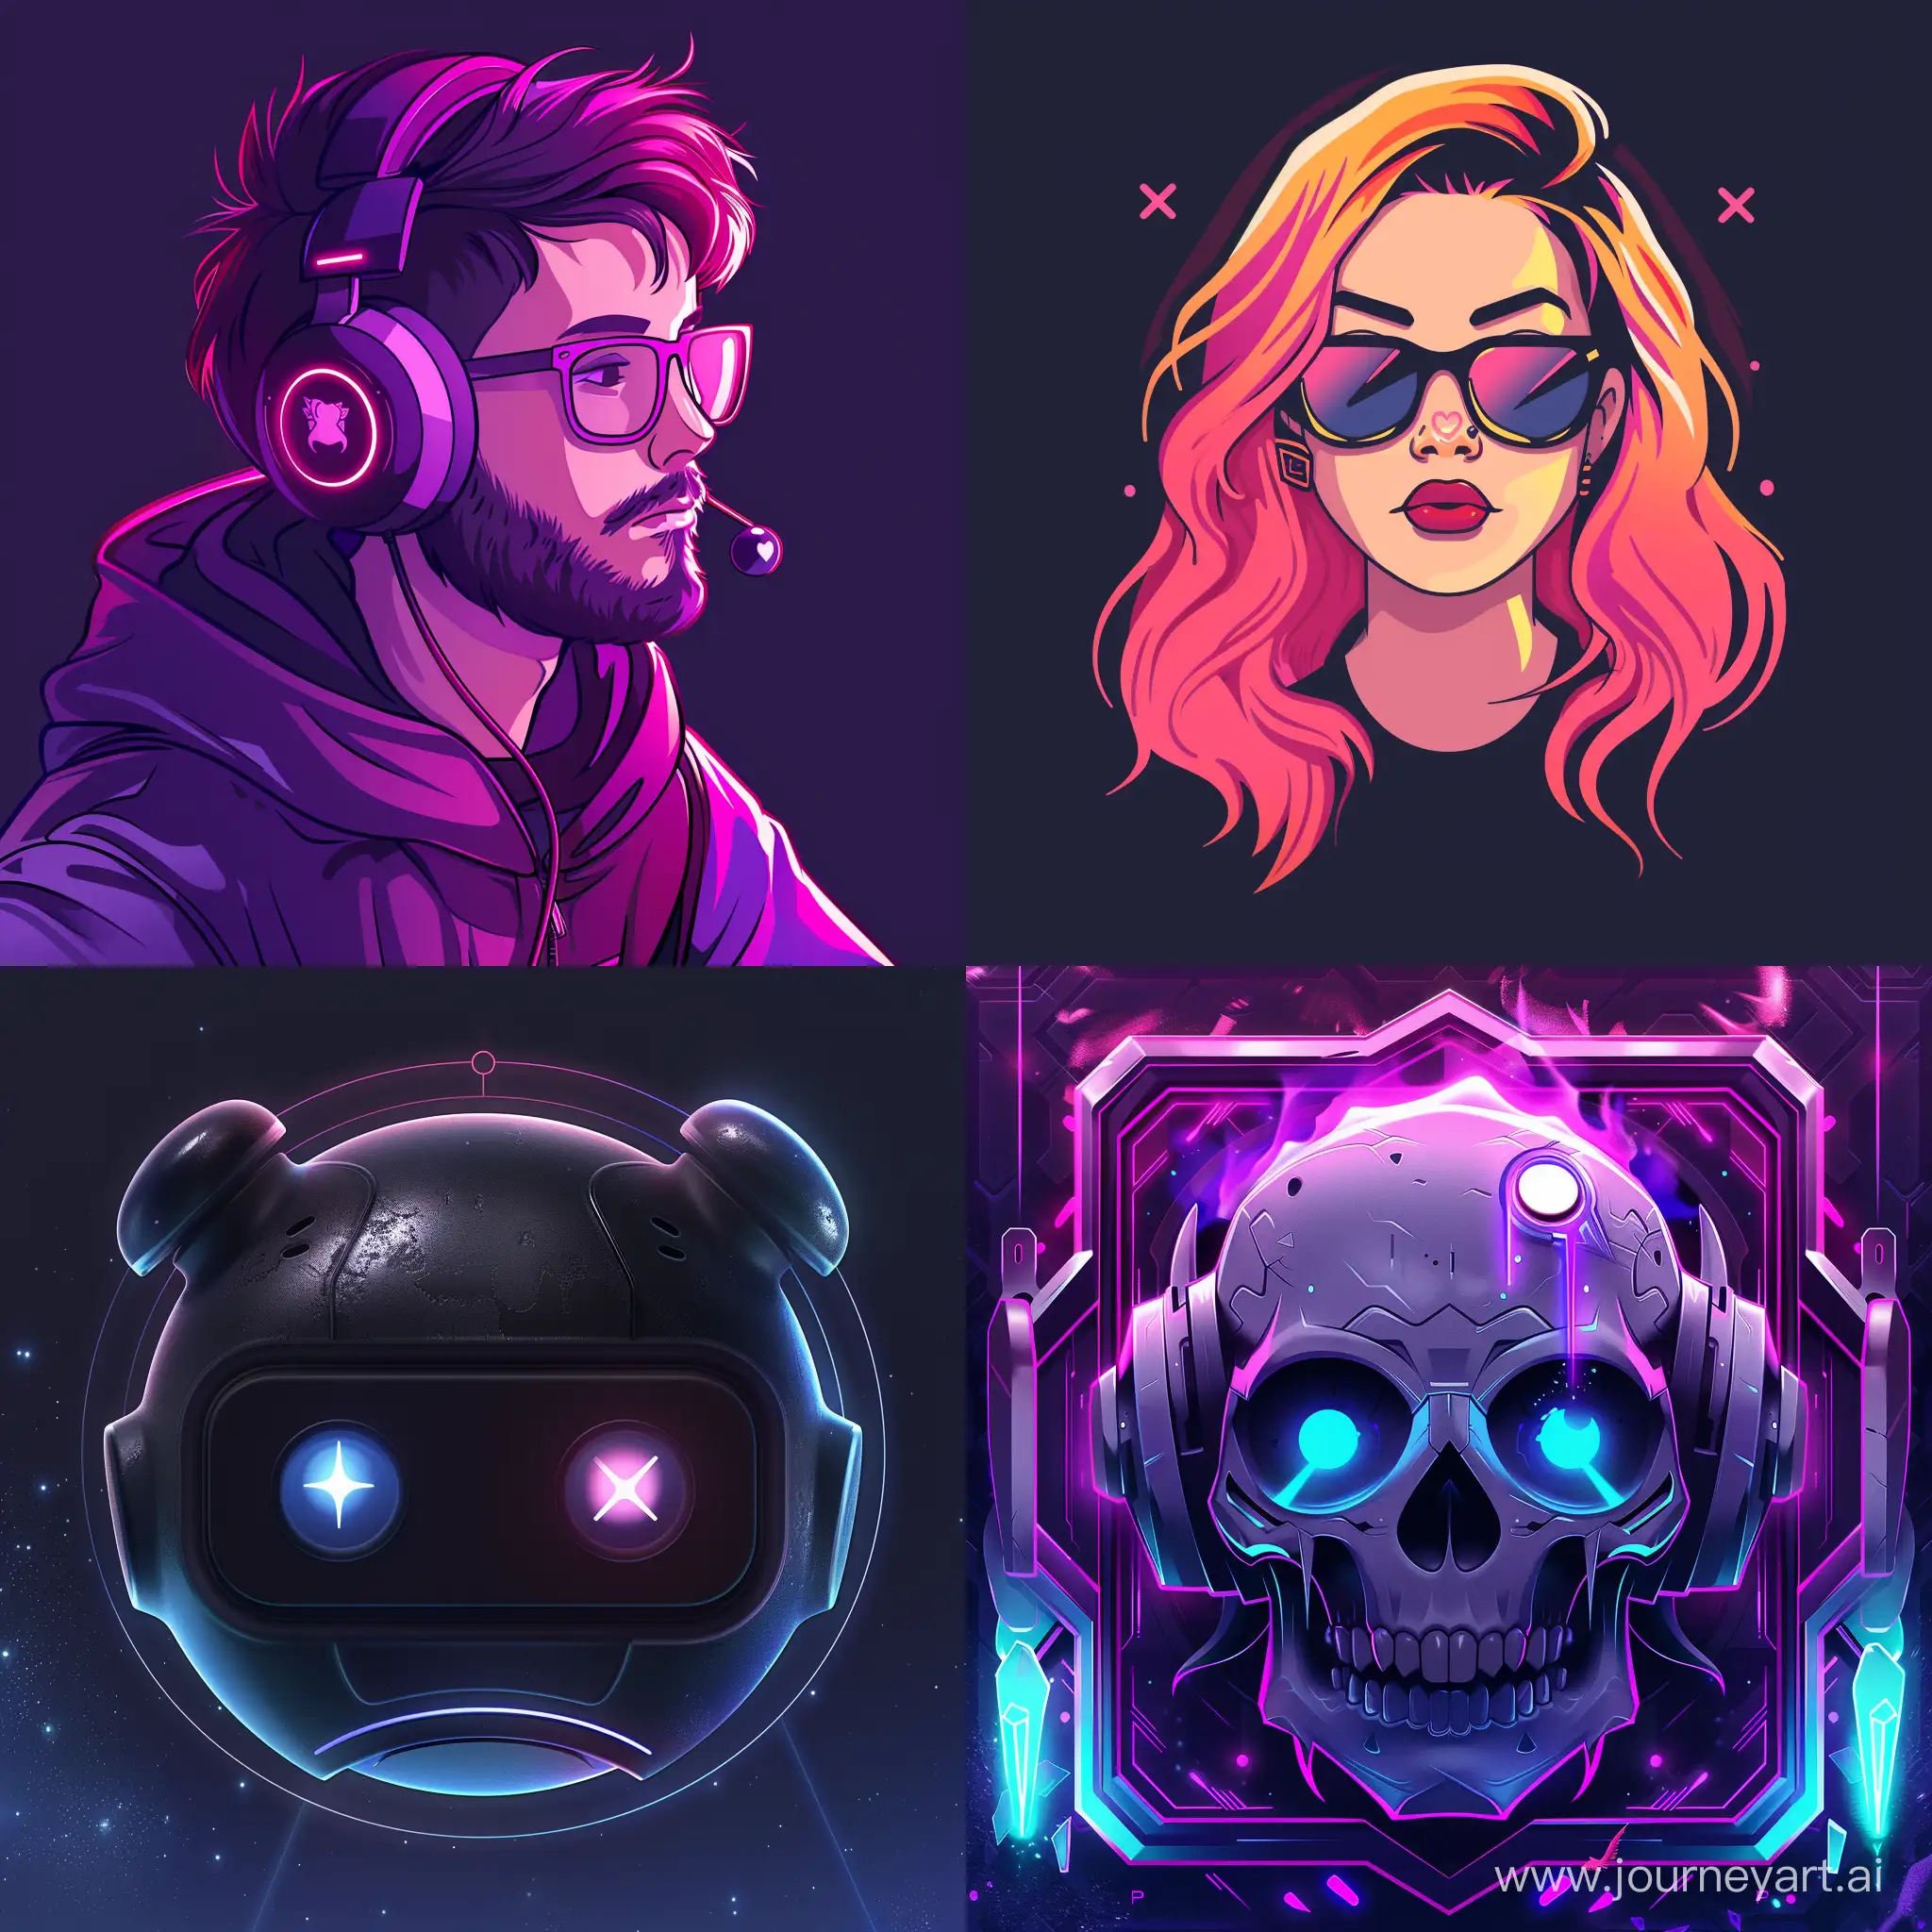 Provide details for your Discord profile picture, including any specific themes, colors, or elements you'd like. Describe your preferences or any symbols that represent you